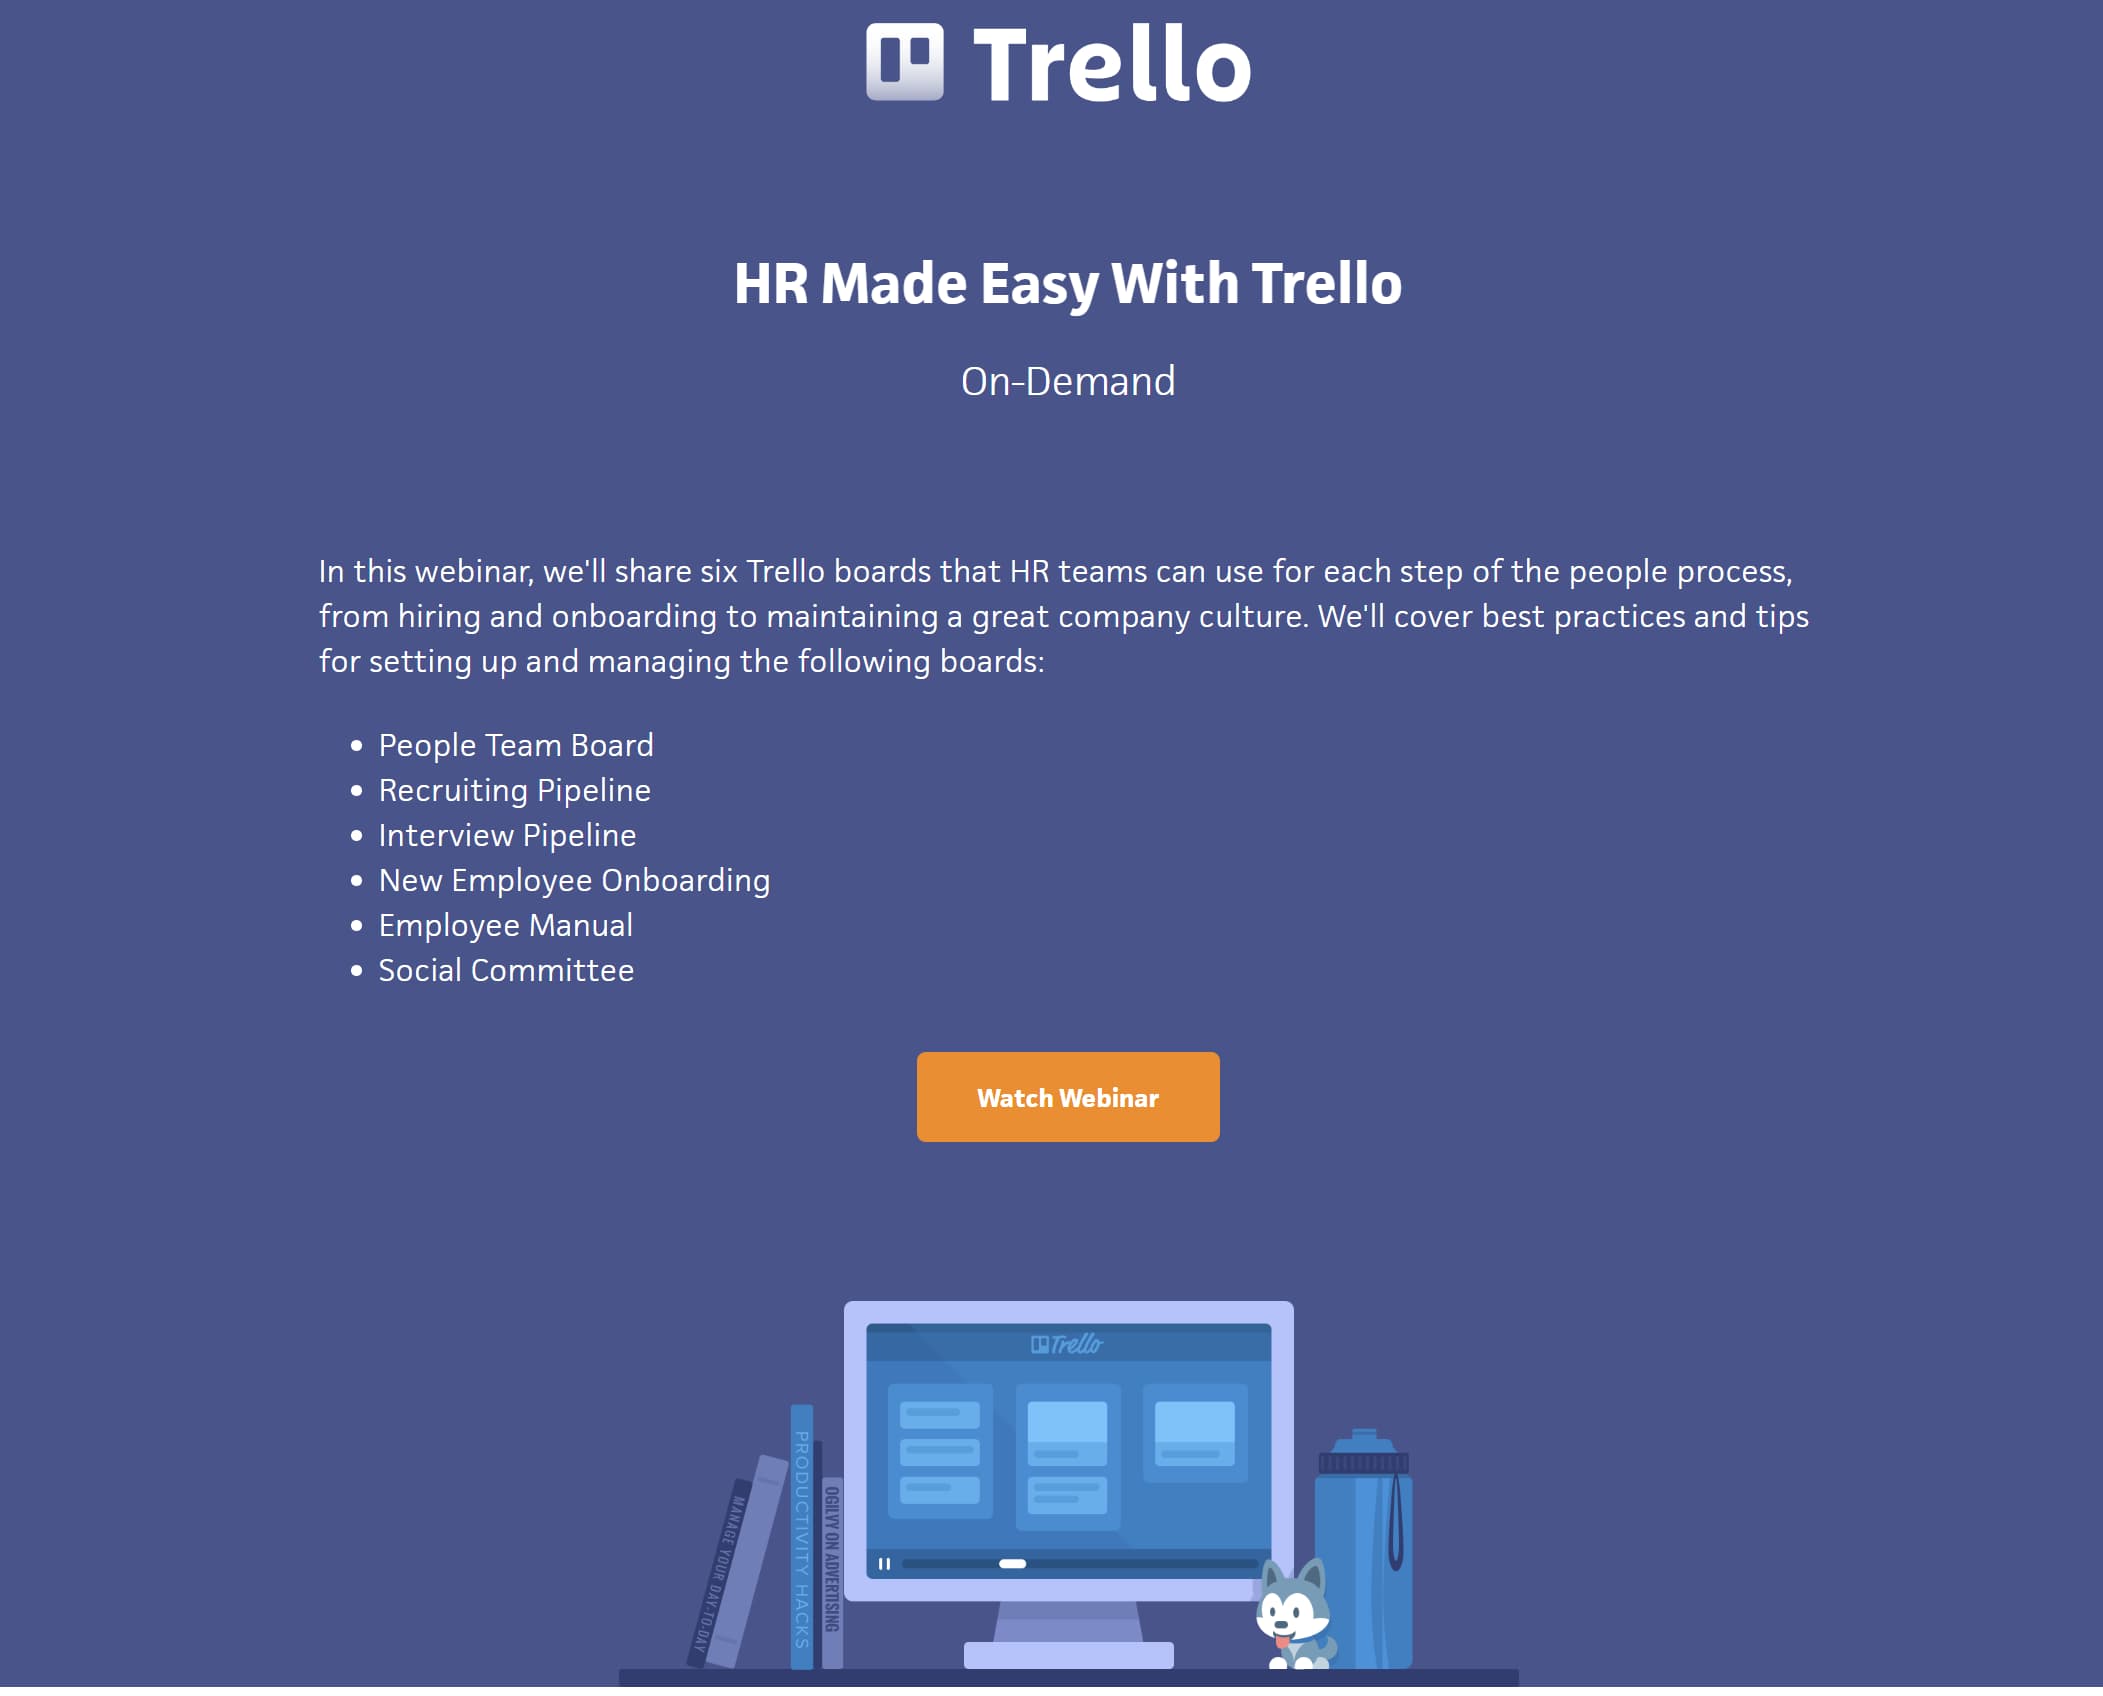 Webinar landing page example from Trello